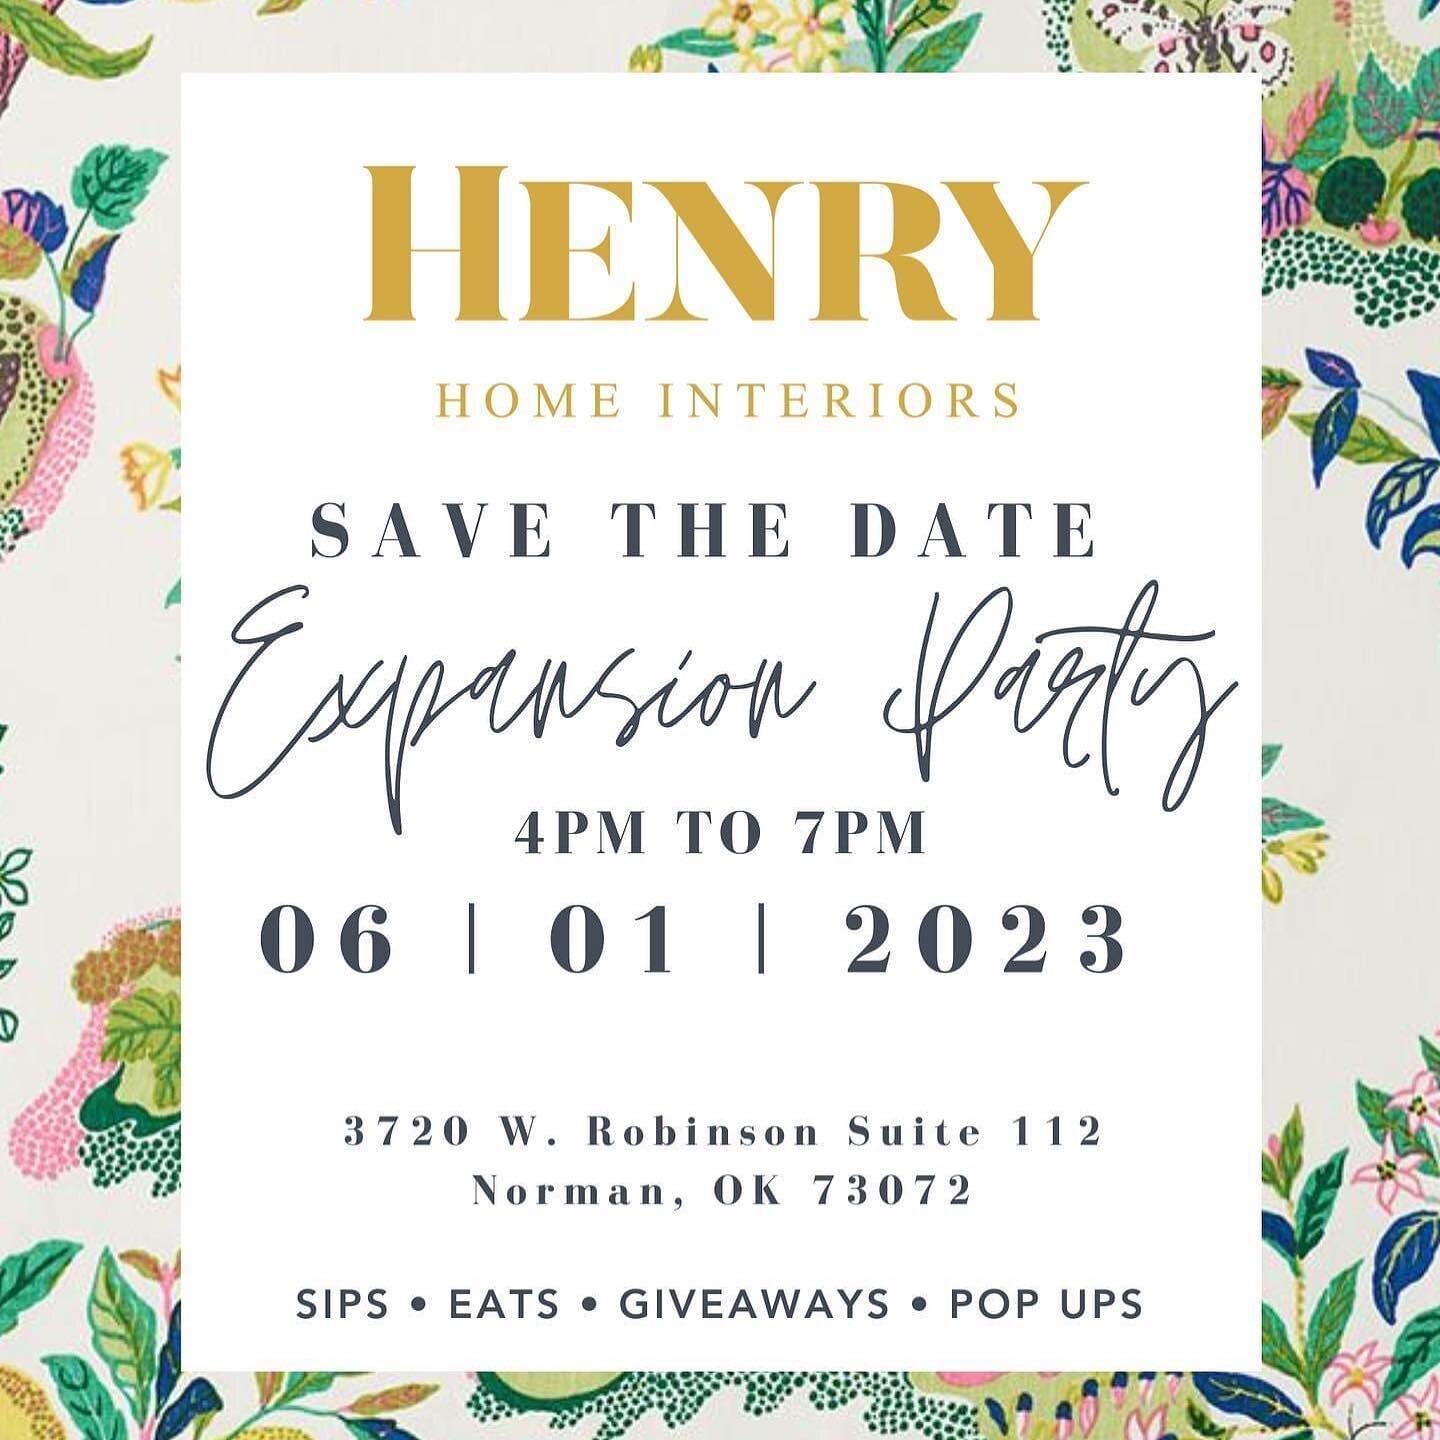 Let&rsquo;s CELEBRATE! Mark your calendars for the Expansion Party at @henryhomeinteriors on Thursday, June 1st! You won&rsquo;t want to miss local vendors, artists, sweet treats, giveaways and more! PLUS the first 75 attendants will receive a lovely